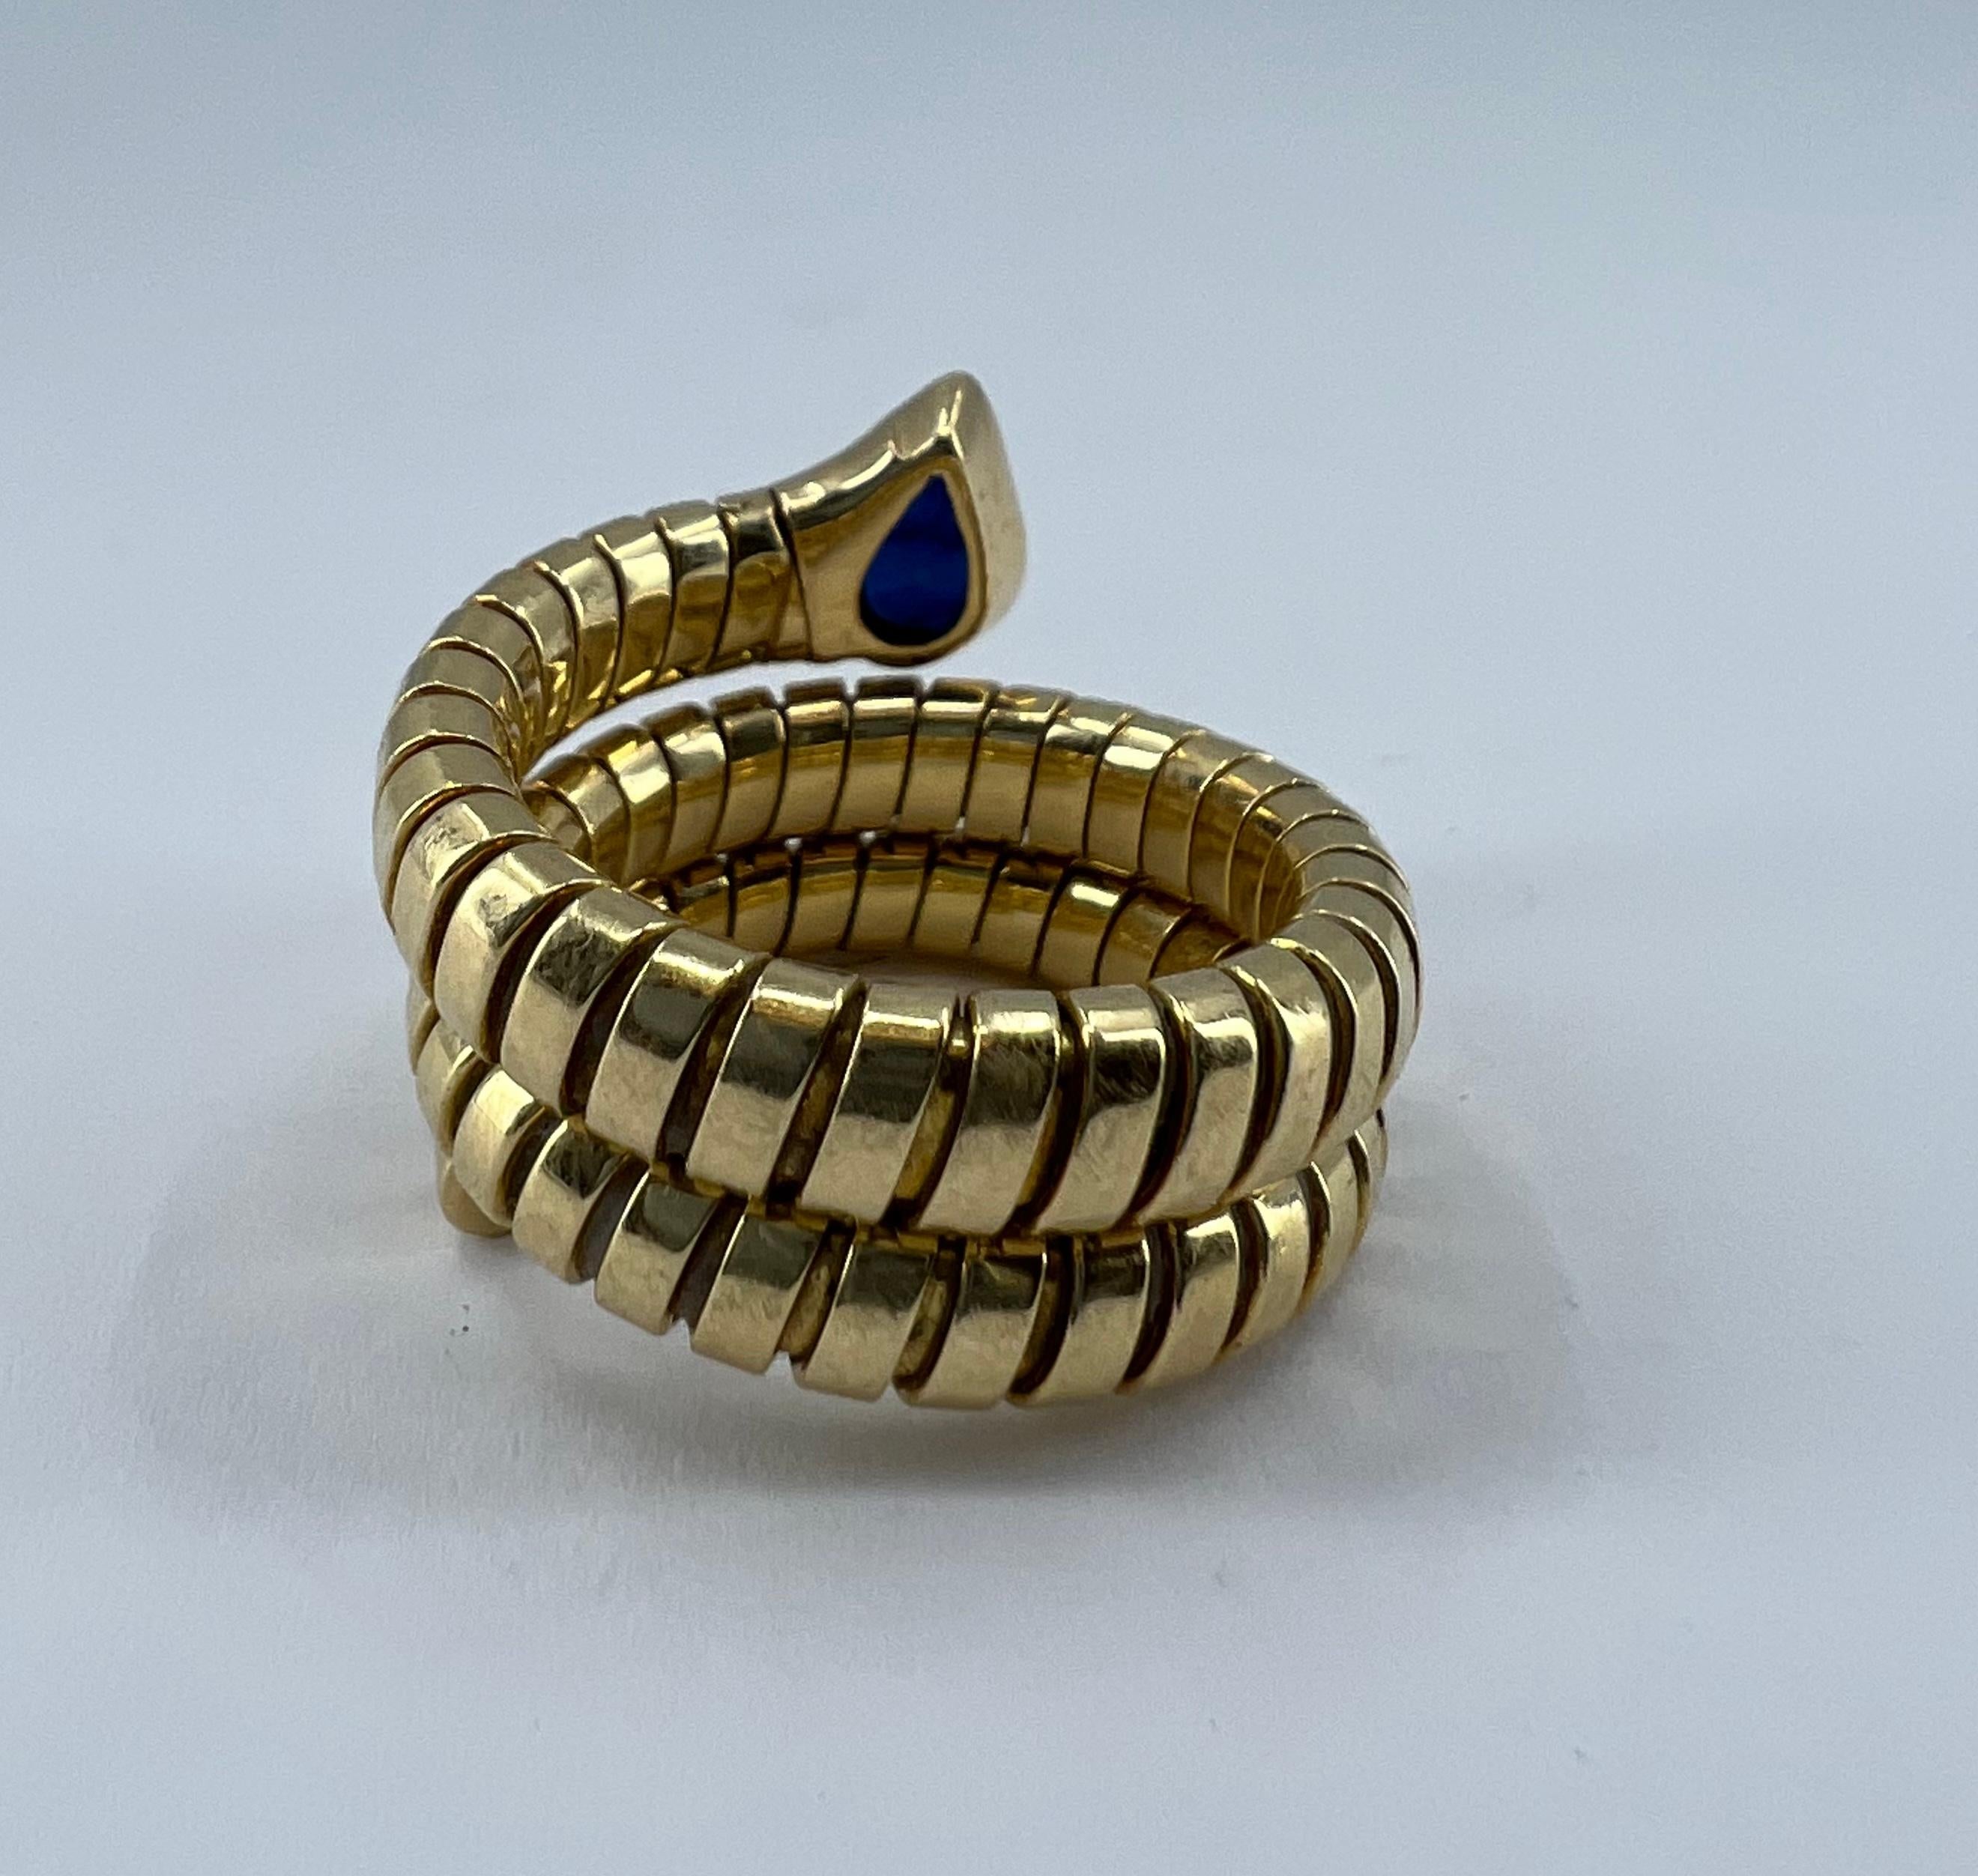 DESIGNER: Bulgari
CIRCA: 1980’s
MATERIALS: 18K Yellow Gold
GEMSTONE: 0.5 cts. Sapphire
WEIGHT: 15.6 grams
RING SIZE: 6.25- 7.25
HALLMARKS: BVLGARI, 750

A beloved Serpenti Tubogas rign by Bulgari, made of 18k gold, features sapphire.

A recognizable